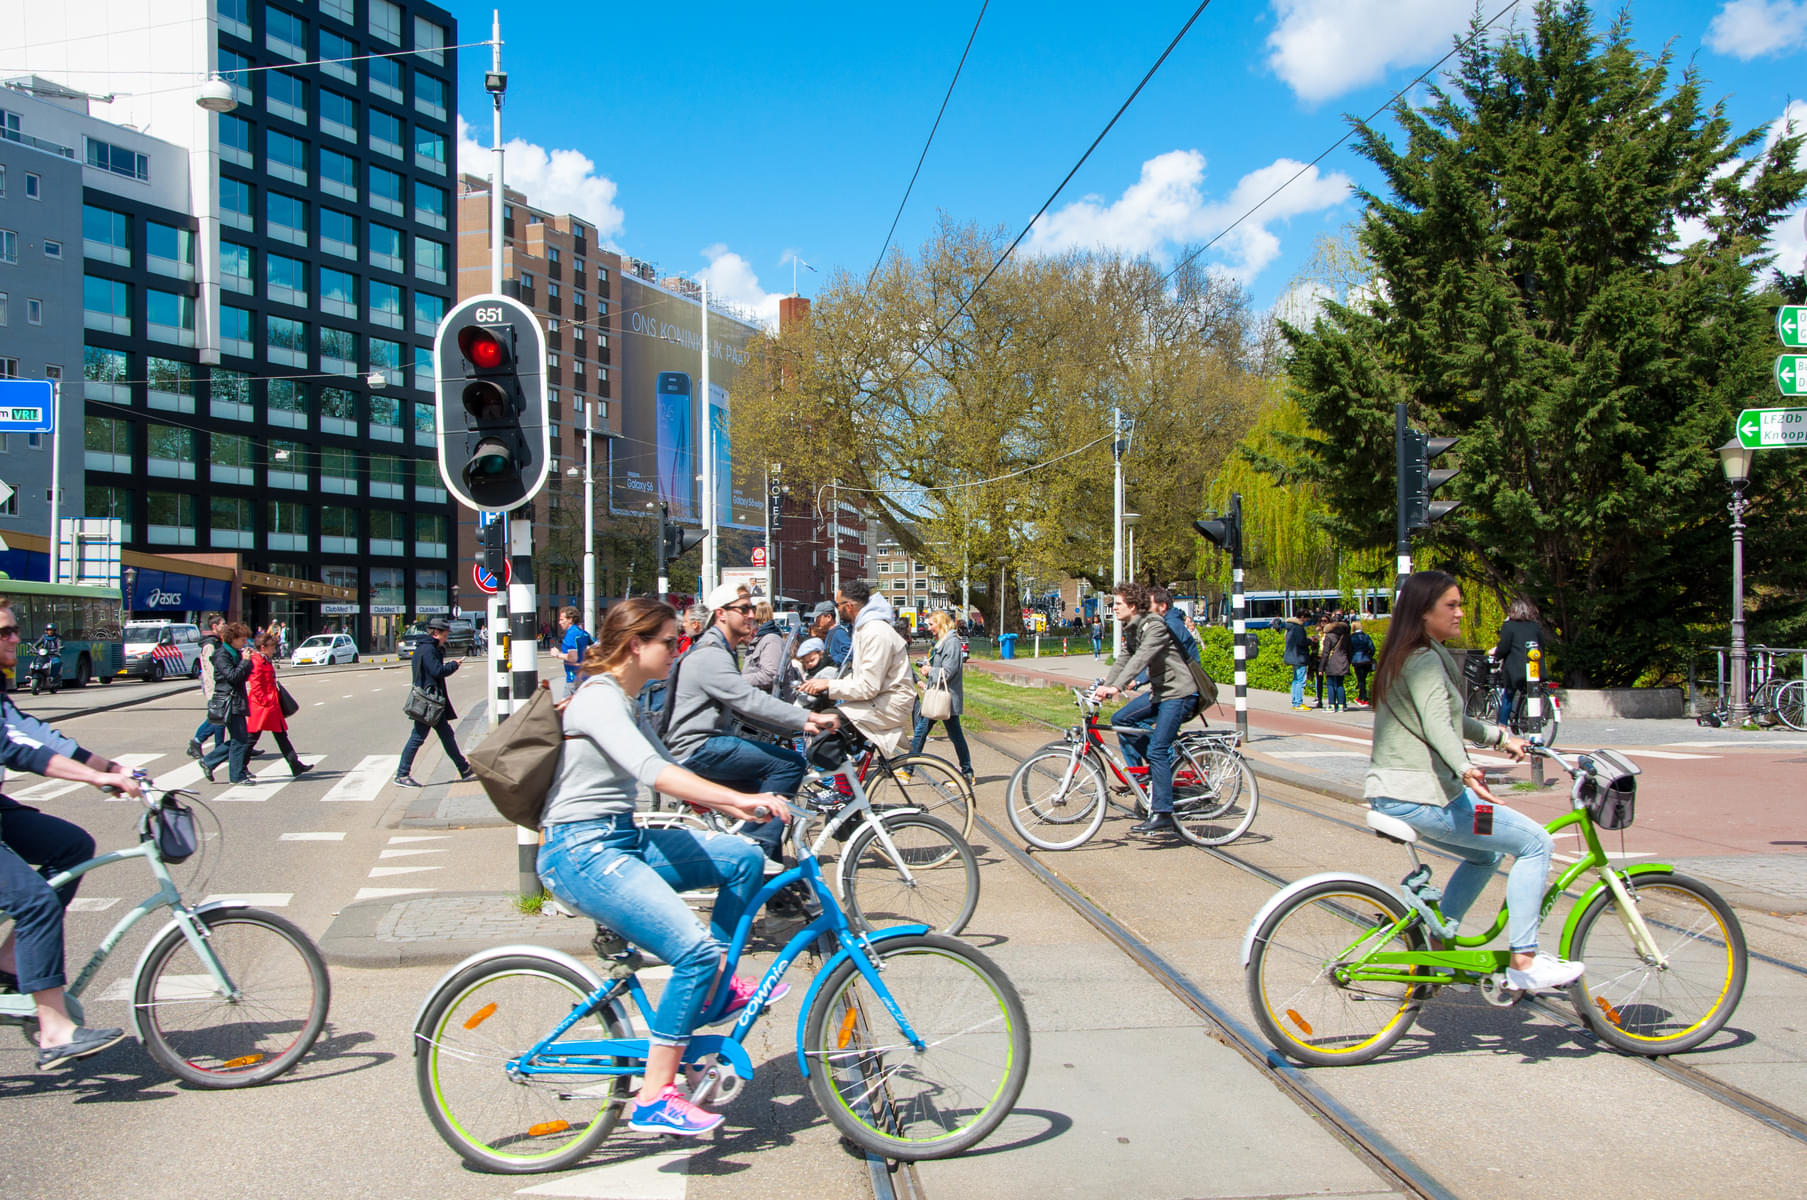 Pedal your way through the streets of Amsterdam